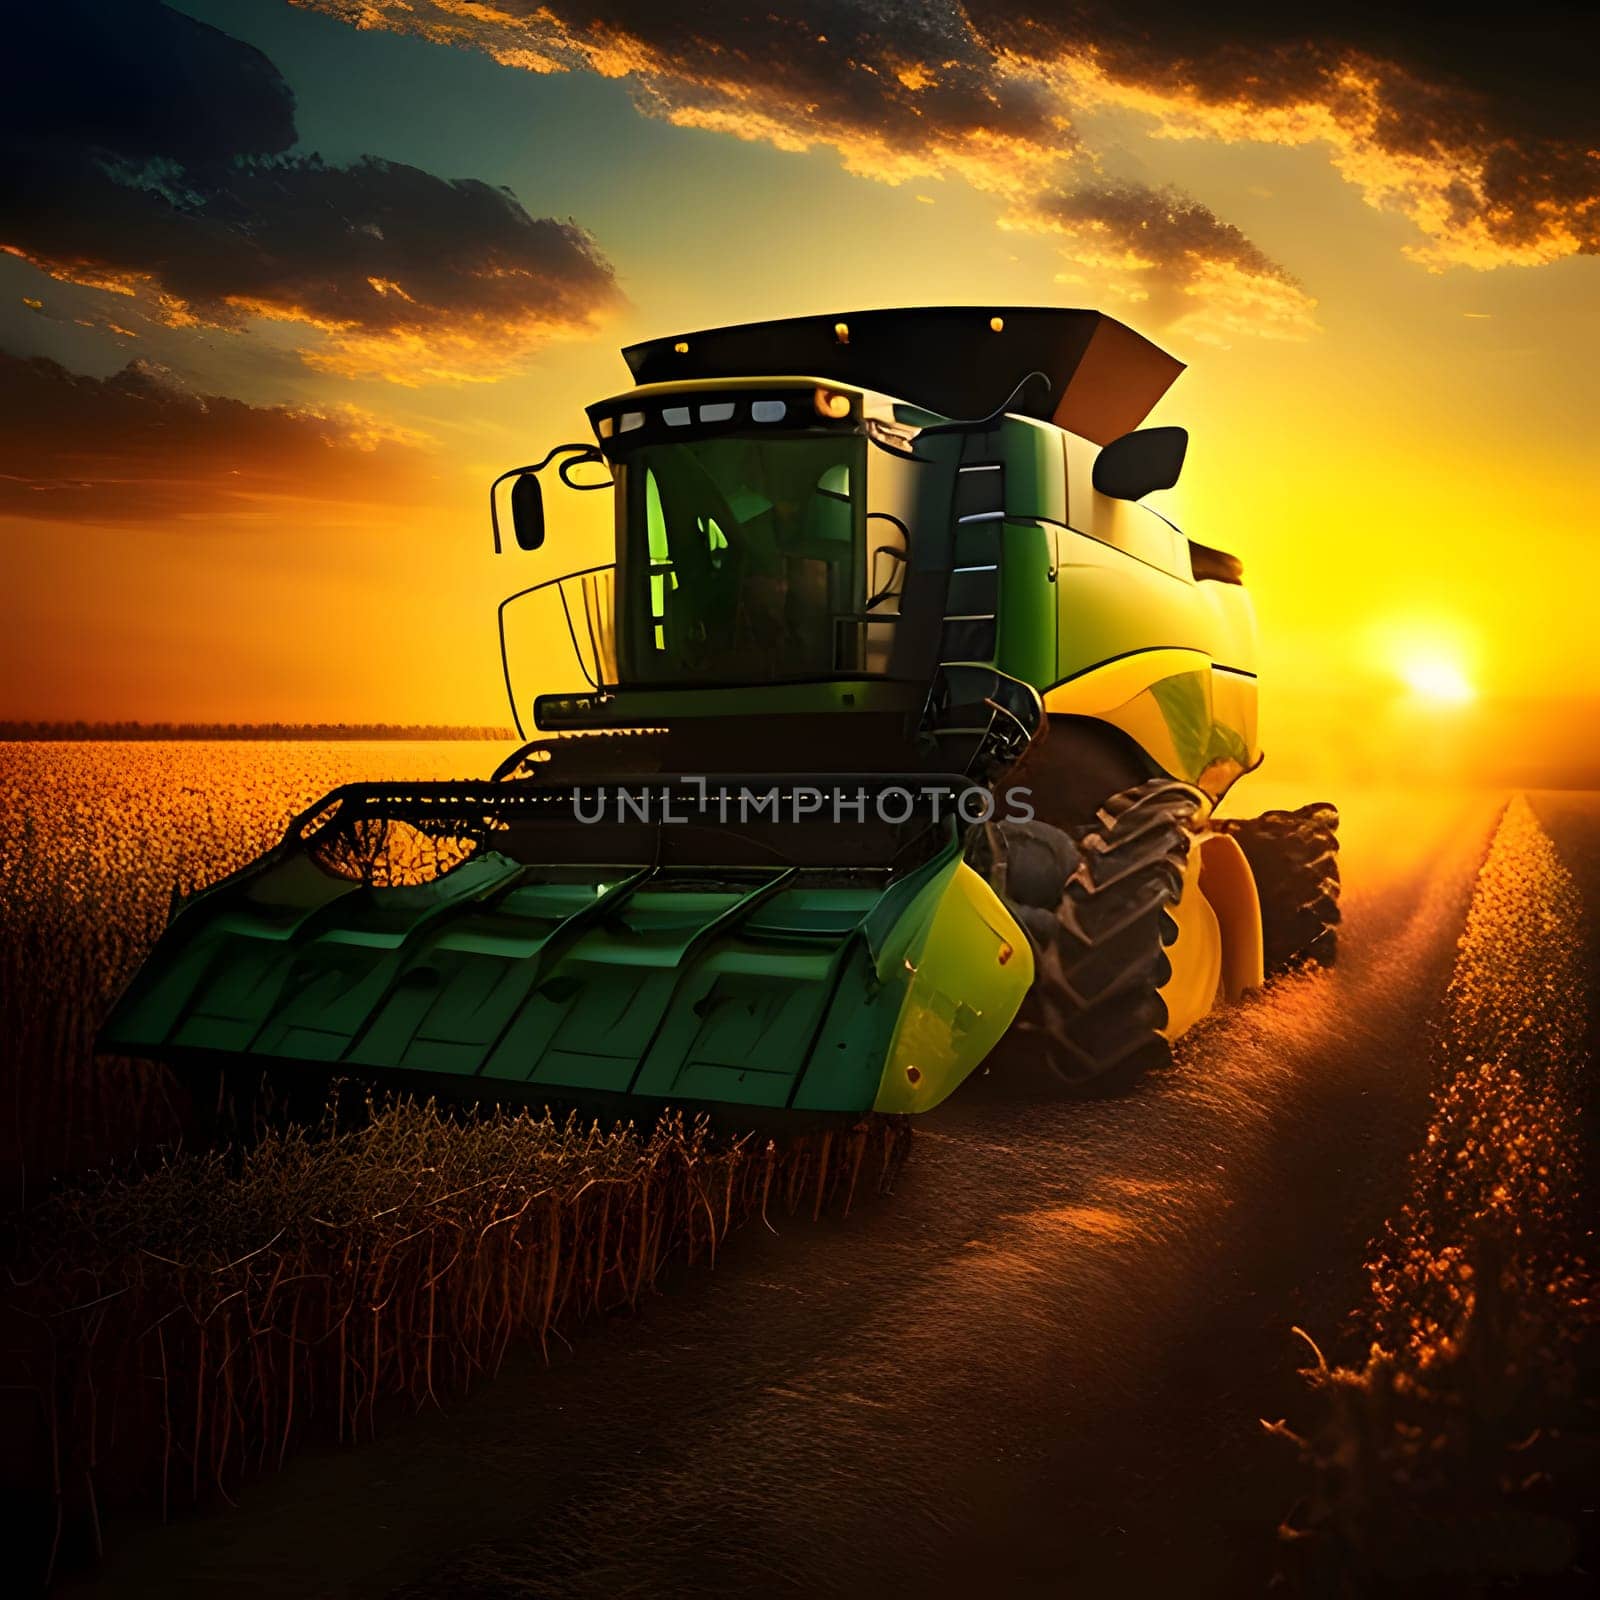 A combine working in the field at sunset. Corn as a dish of thanksgiving for the harvest. An atmosphere of joy and celebration.